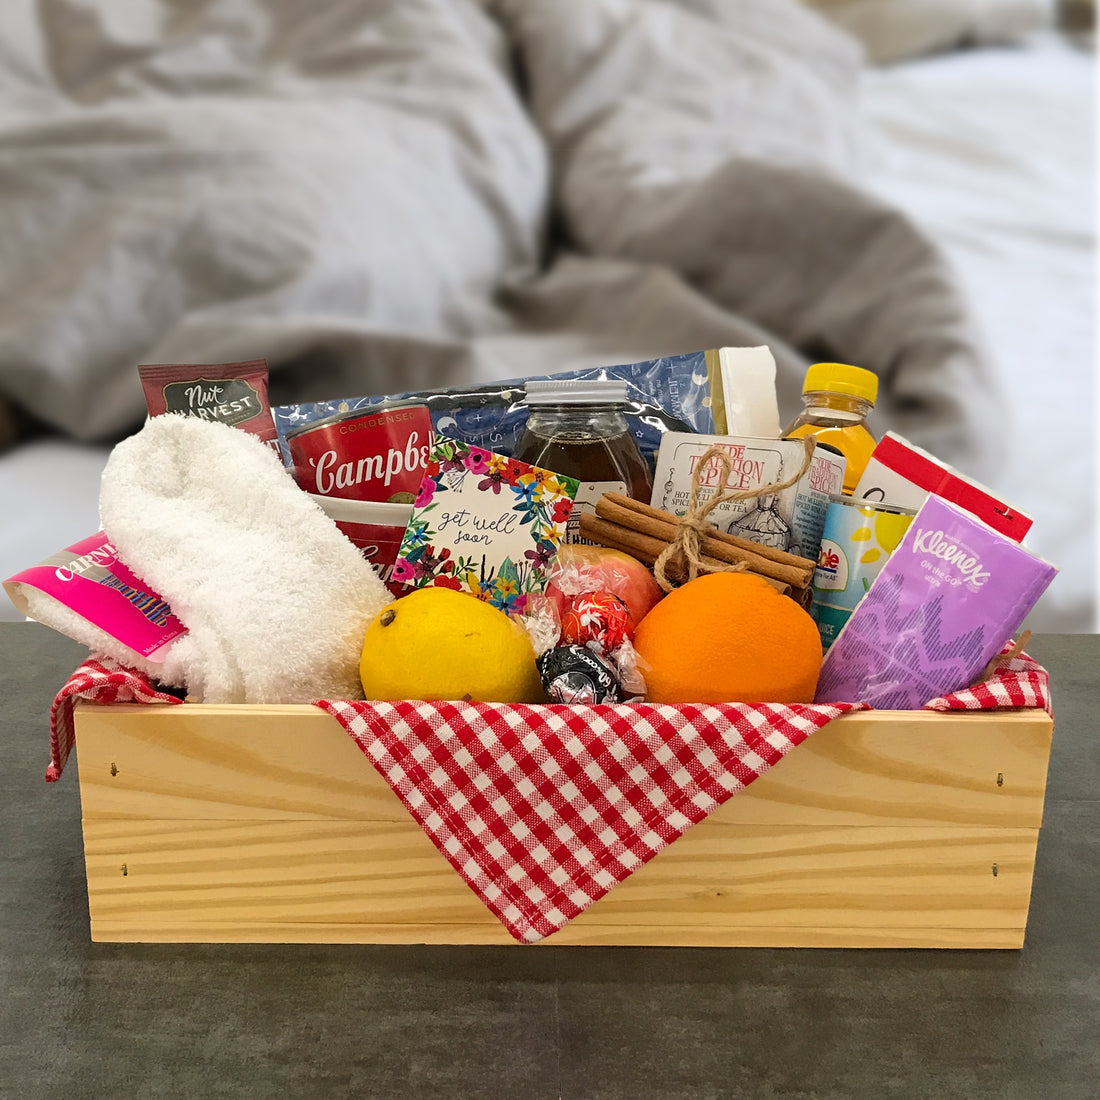 How to make a get well gift basket